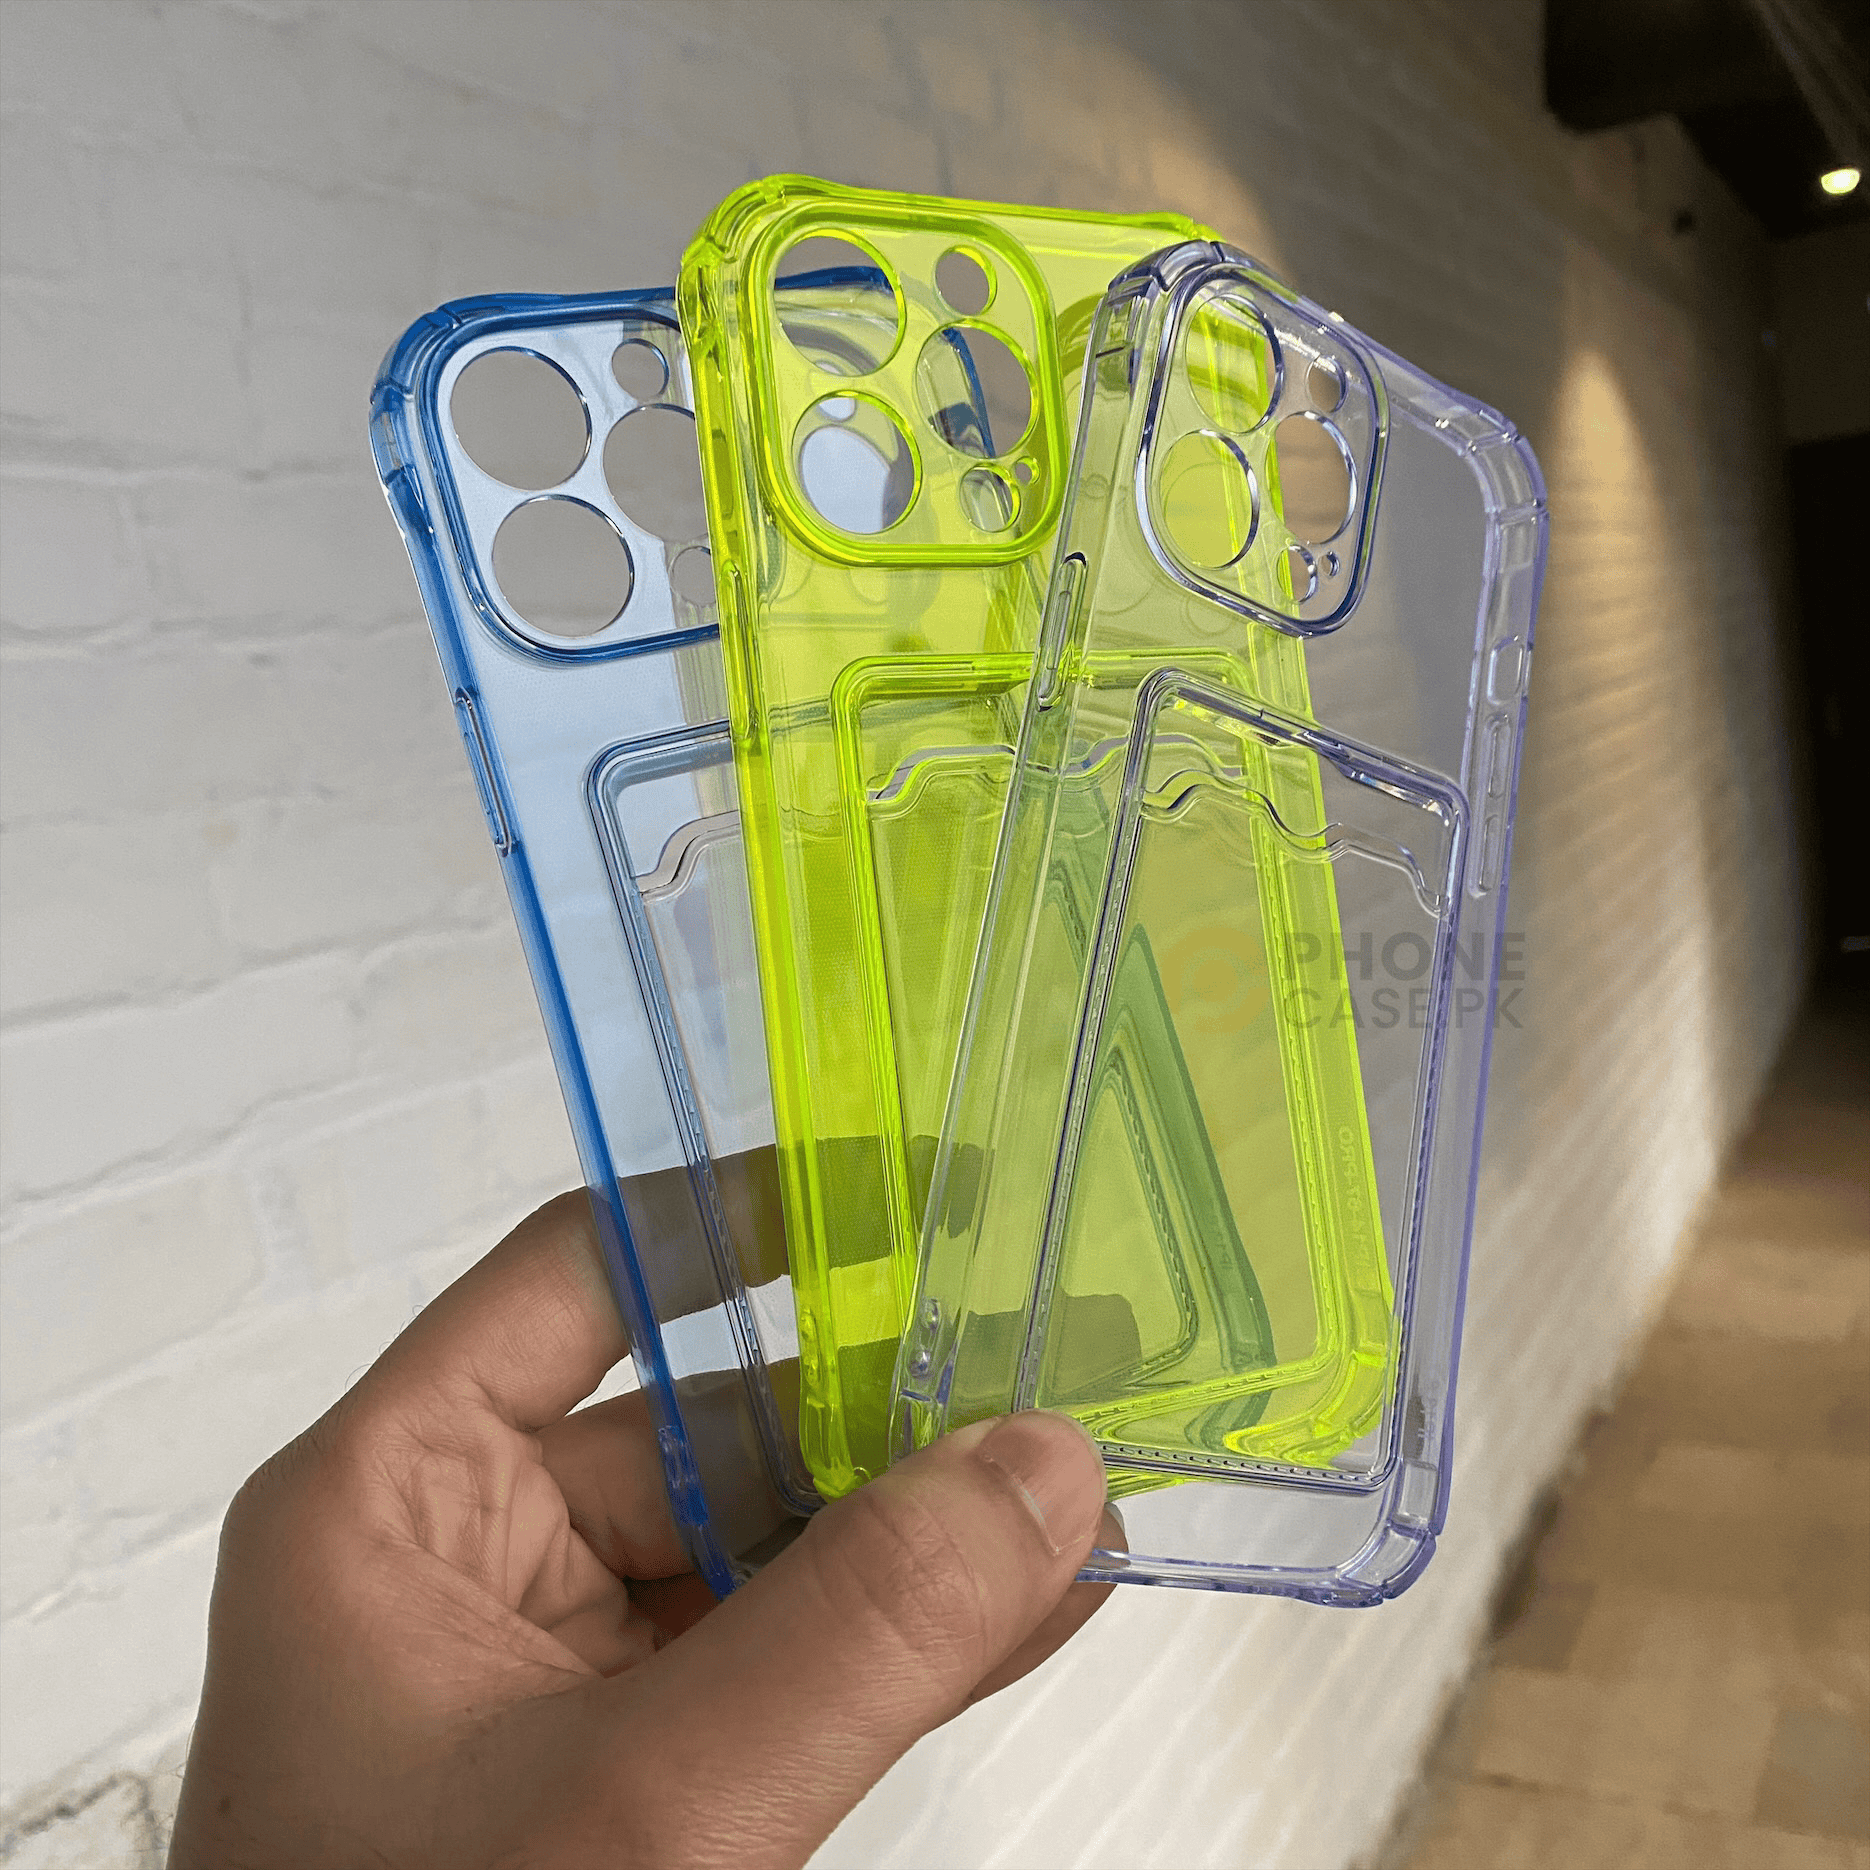 iPhone 14 Pro Max Wallet & Card Holder Fluorescent Neon Case